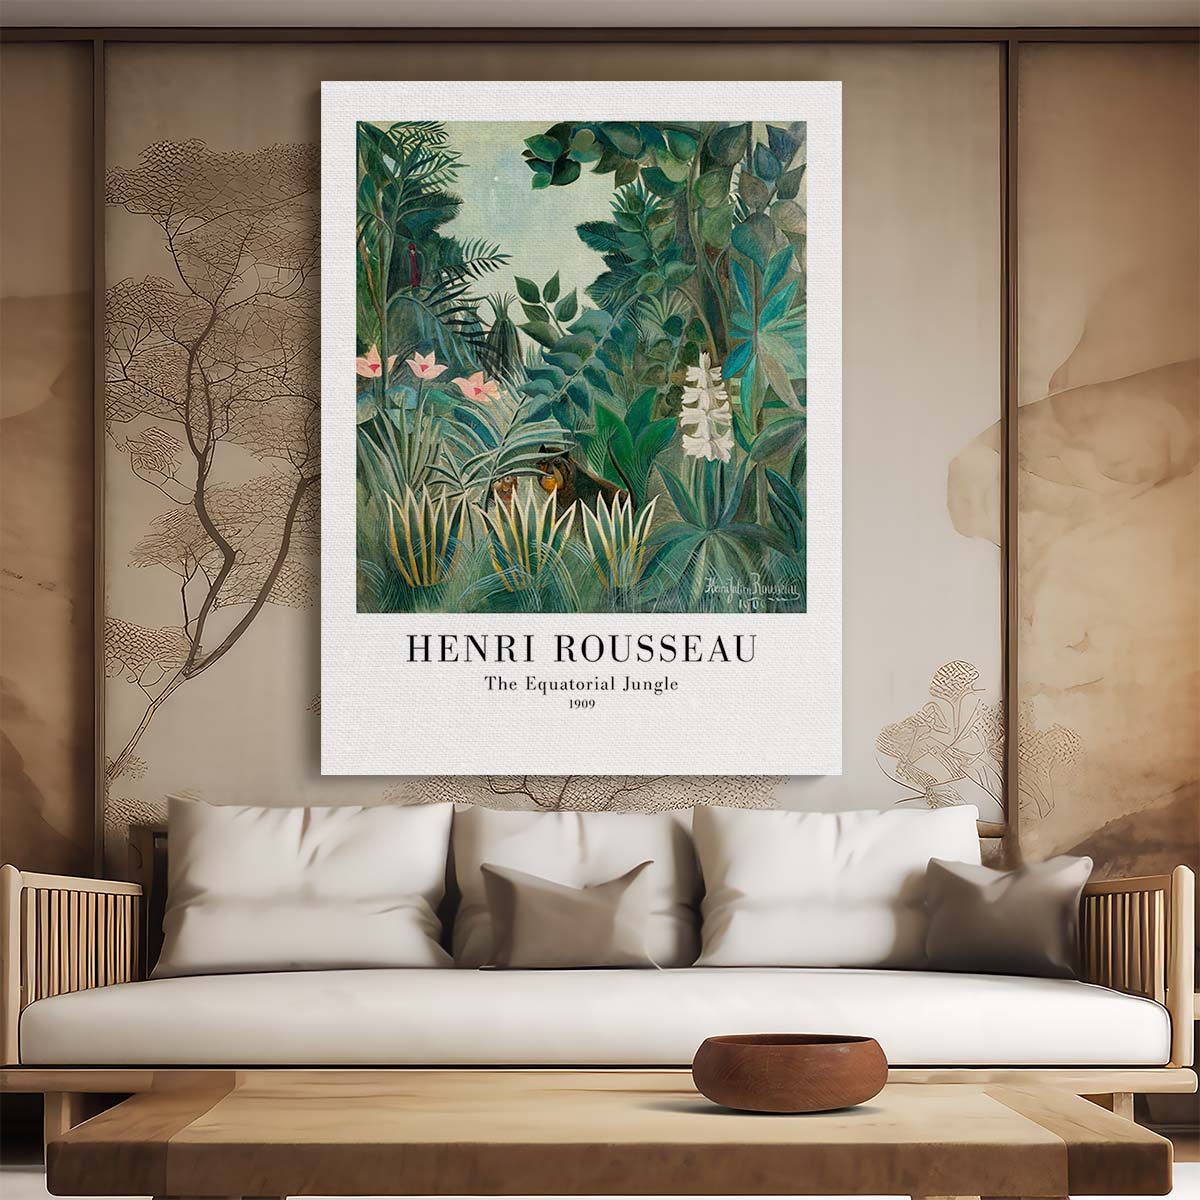 Exotic Tropical Jungle Acrylic Painting by Master Artist Henri Rousseau by Luxuriance Designs, made in USA